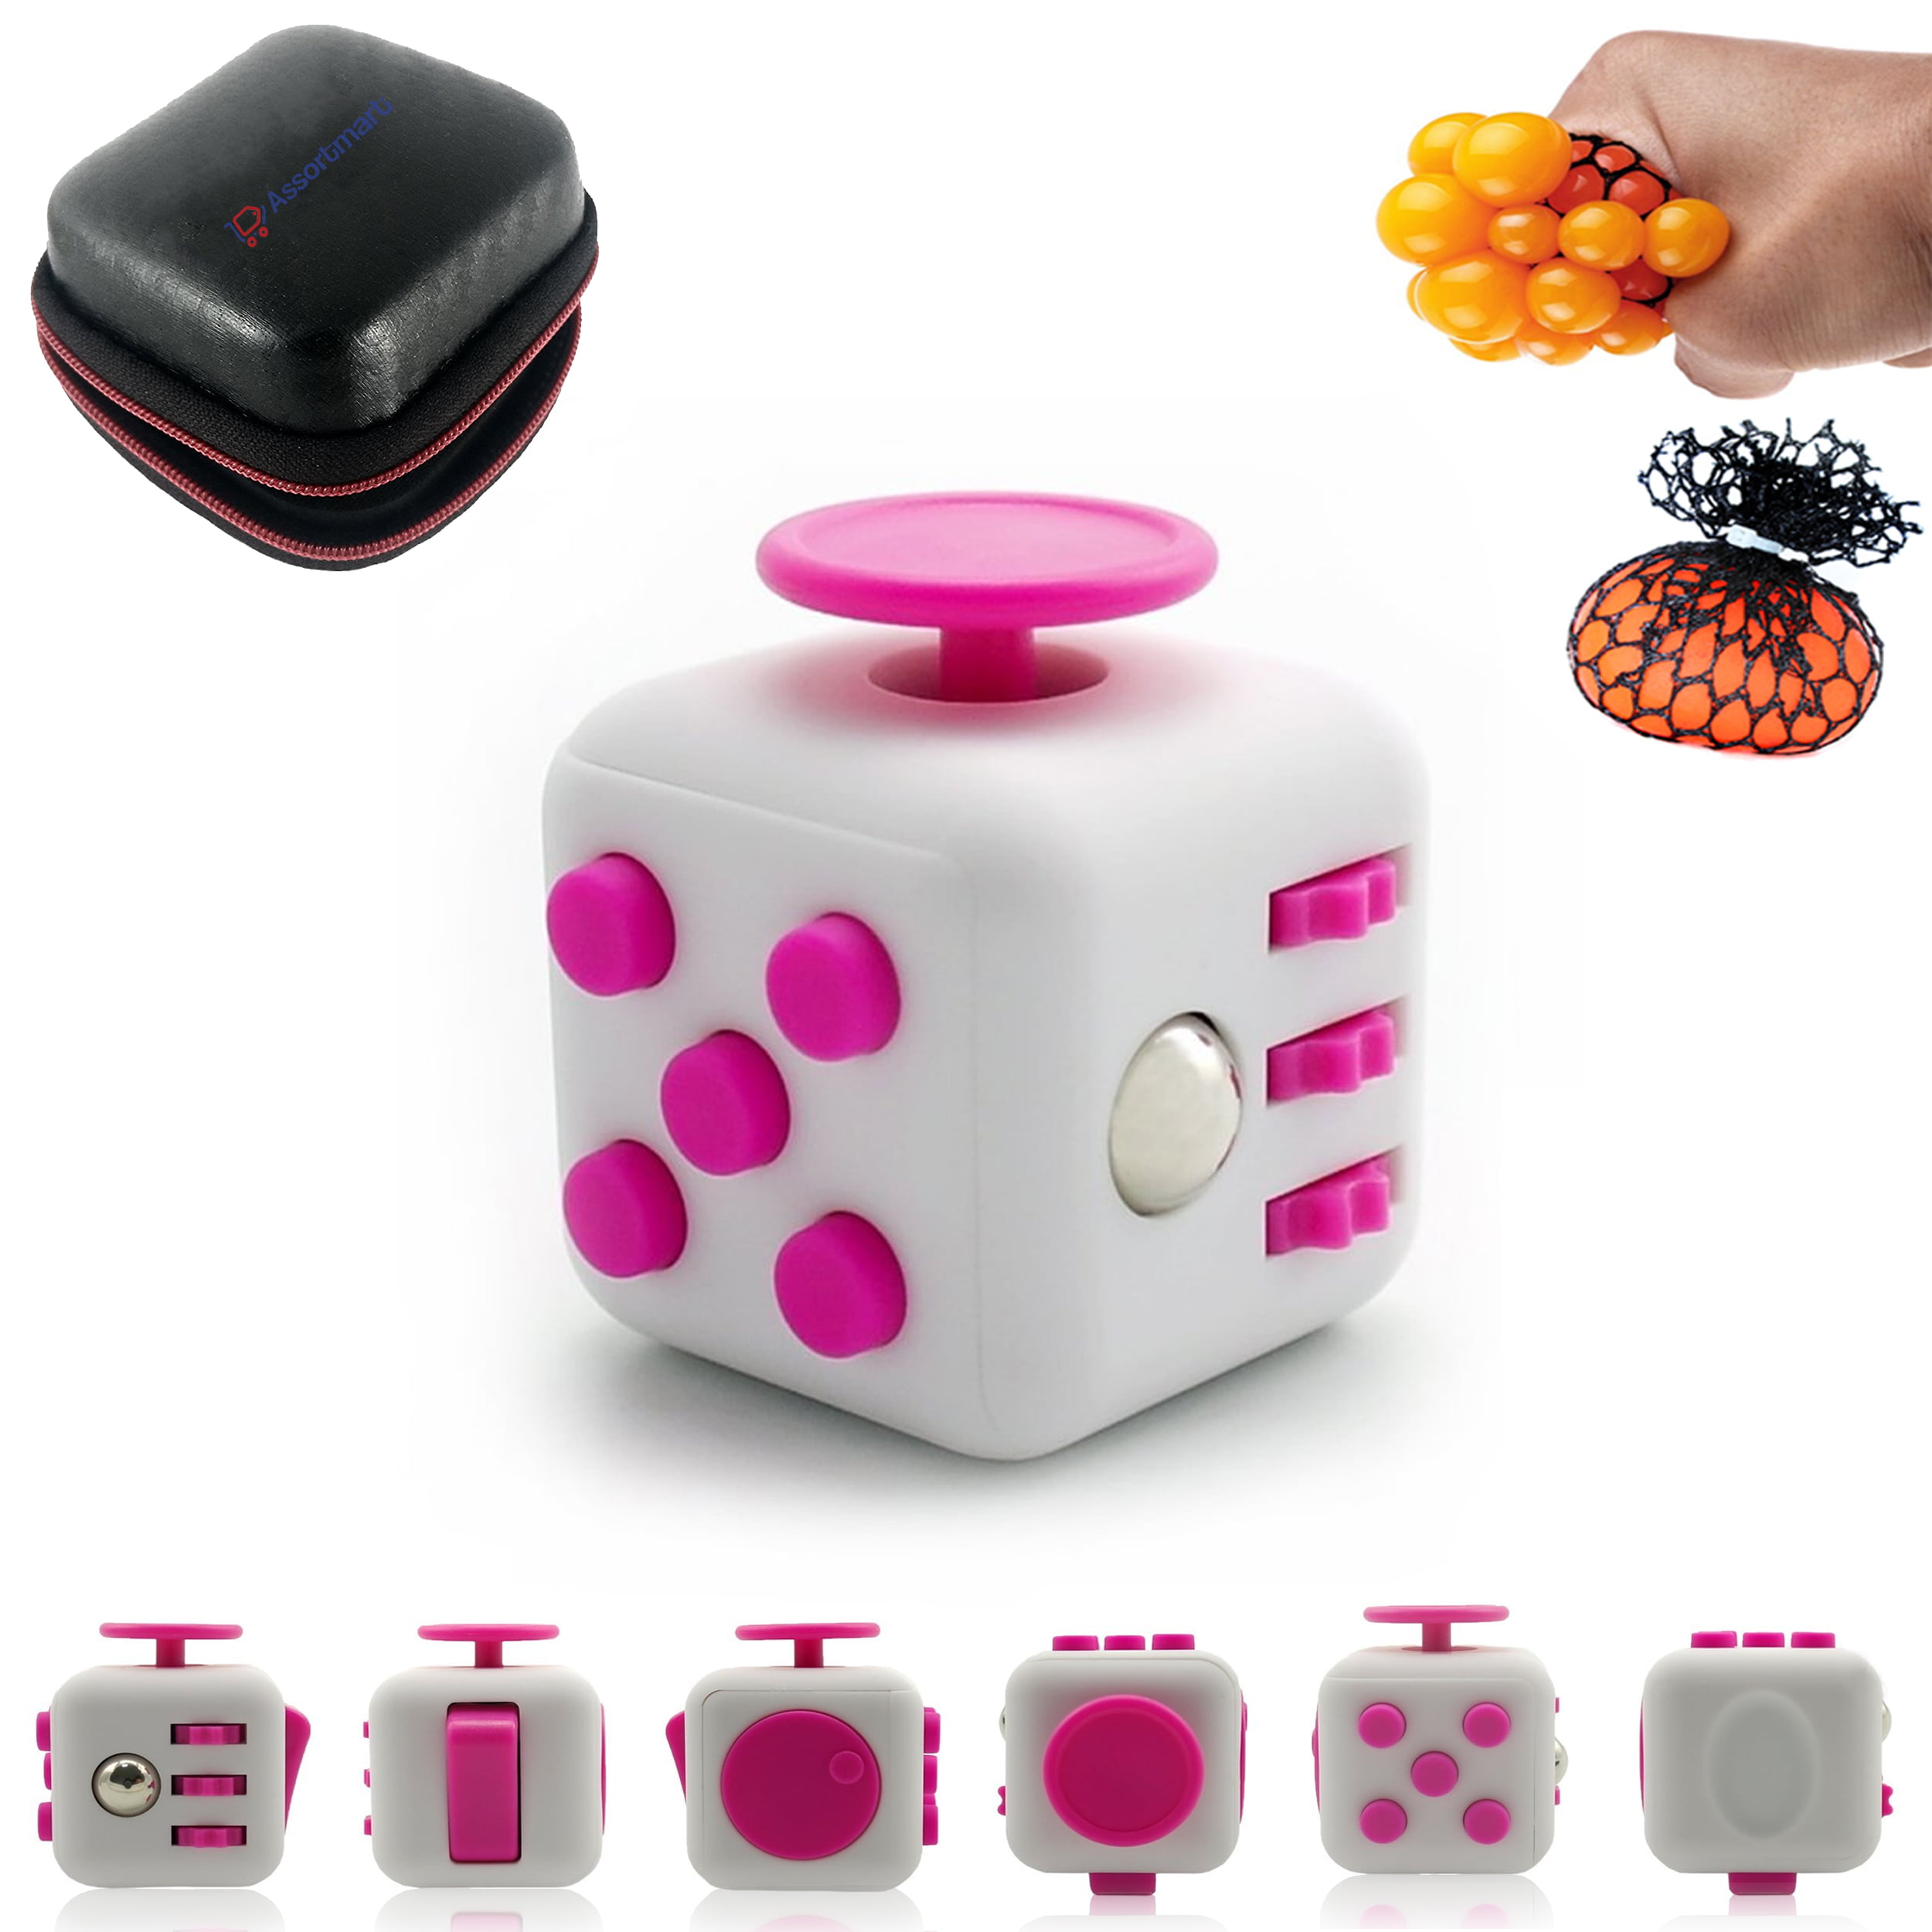 CASE ONLY STORAGE CASE FOR THE ANTI-ANXIETY FIDGET CUBE